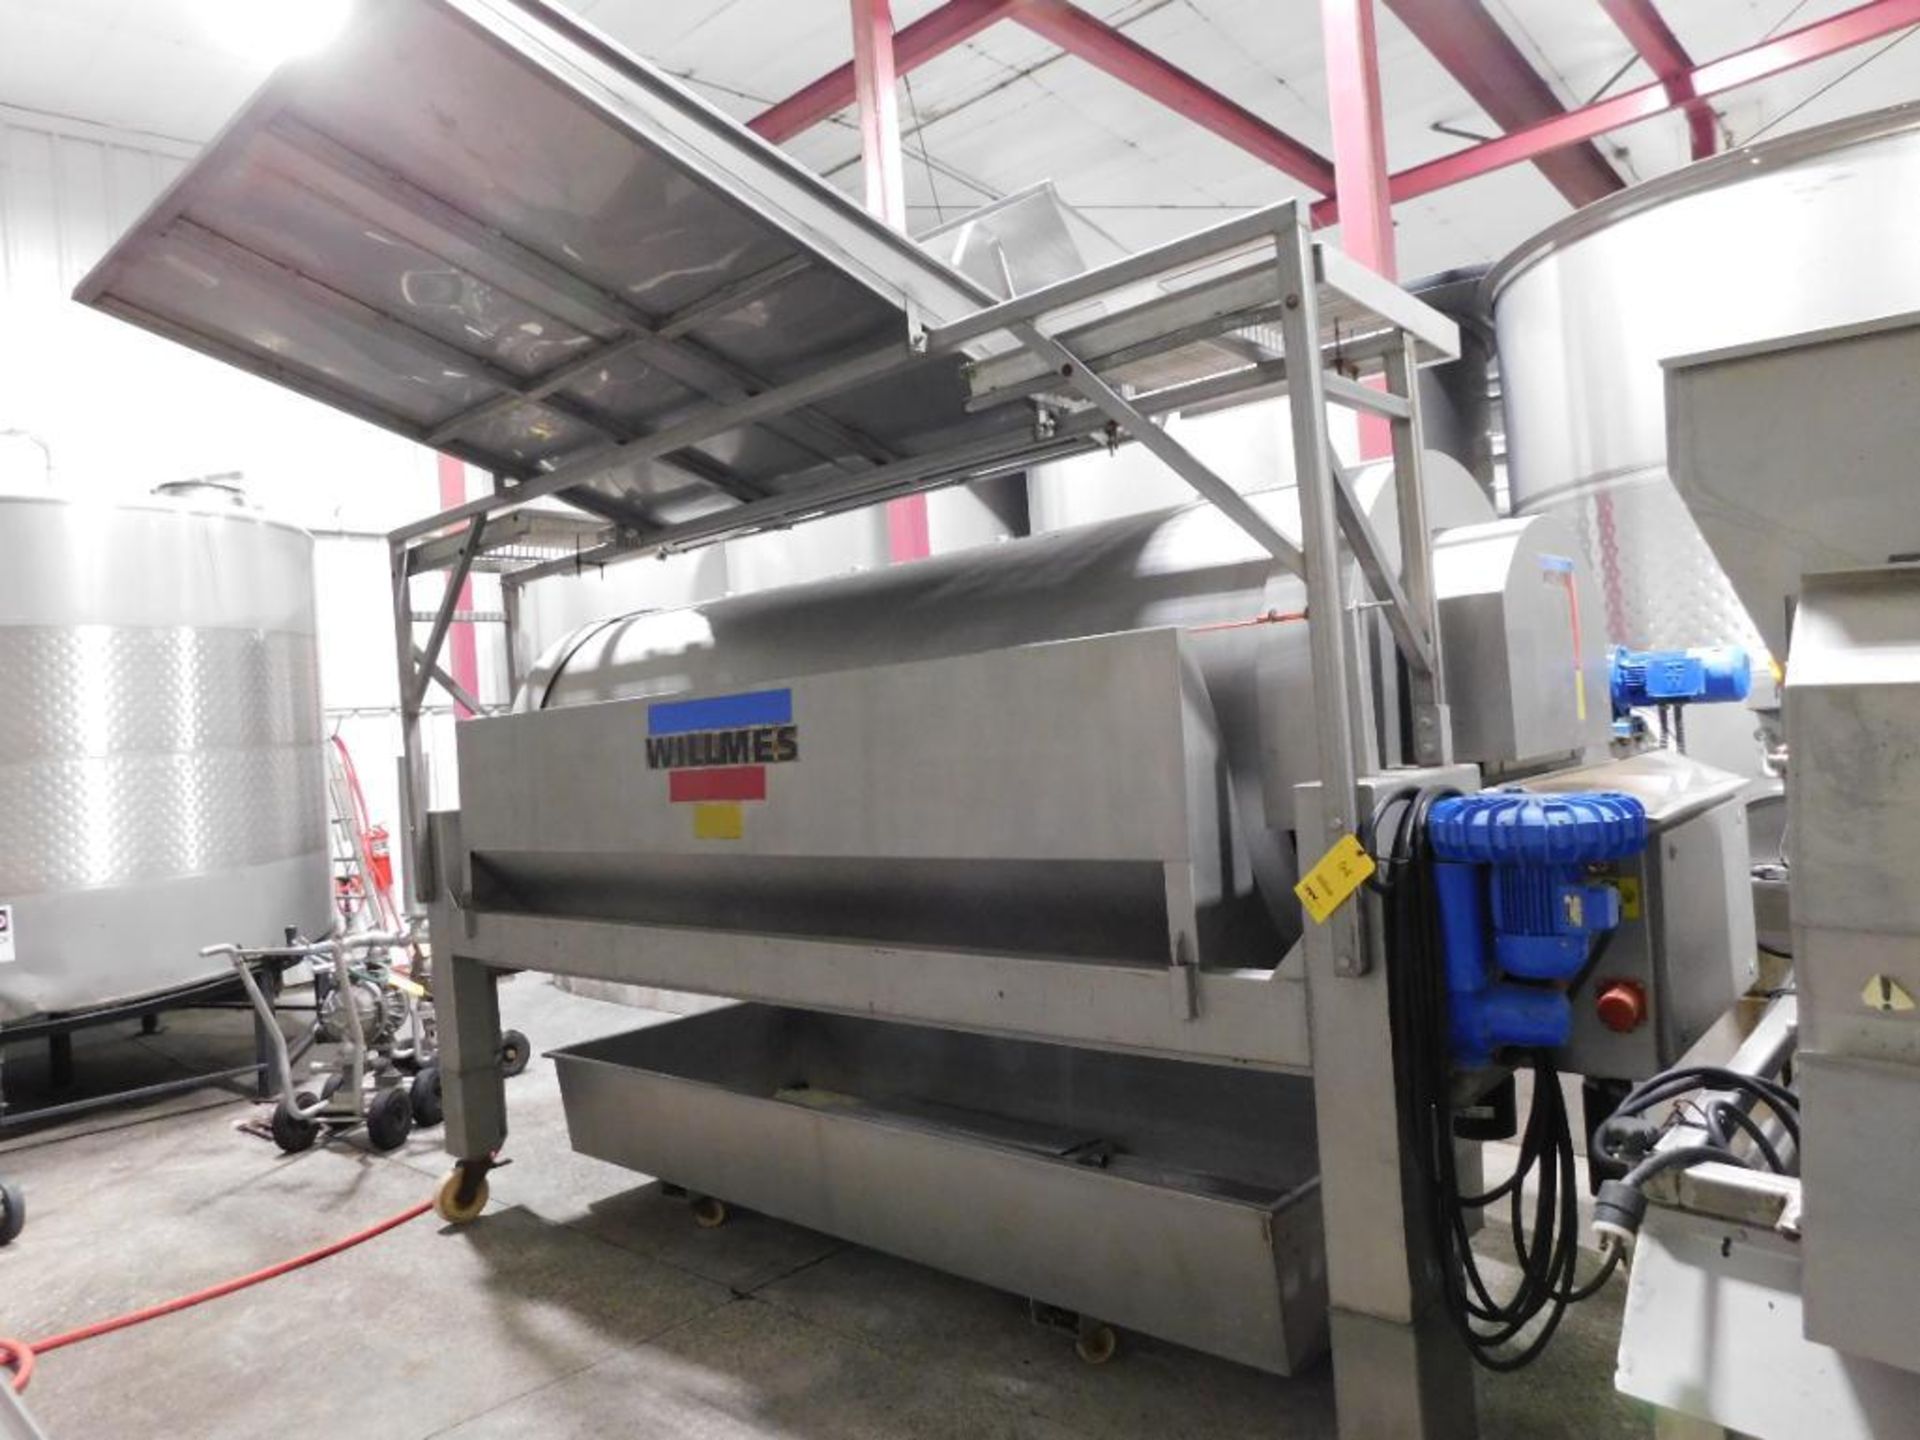 Willmes Merlin UP3000 3000 Liter Press, Full Automatic Control, Stainless Steel, Vertical Juice Drai - Image 3 of 6